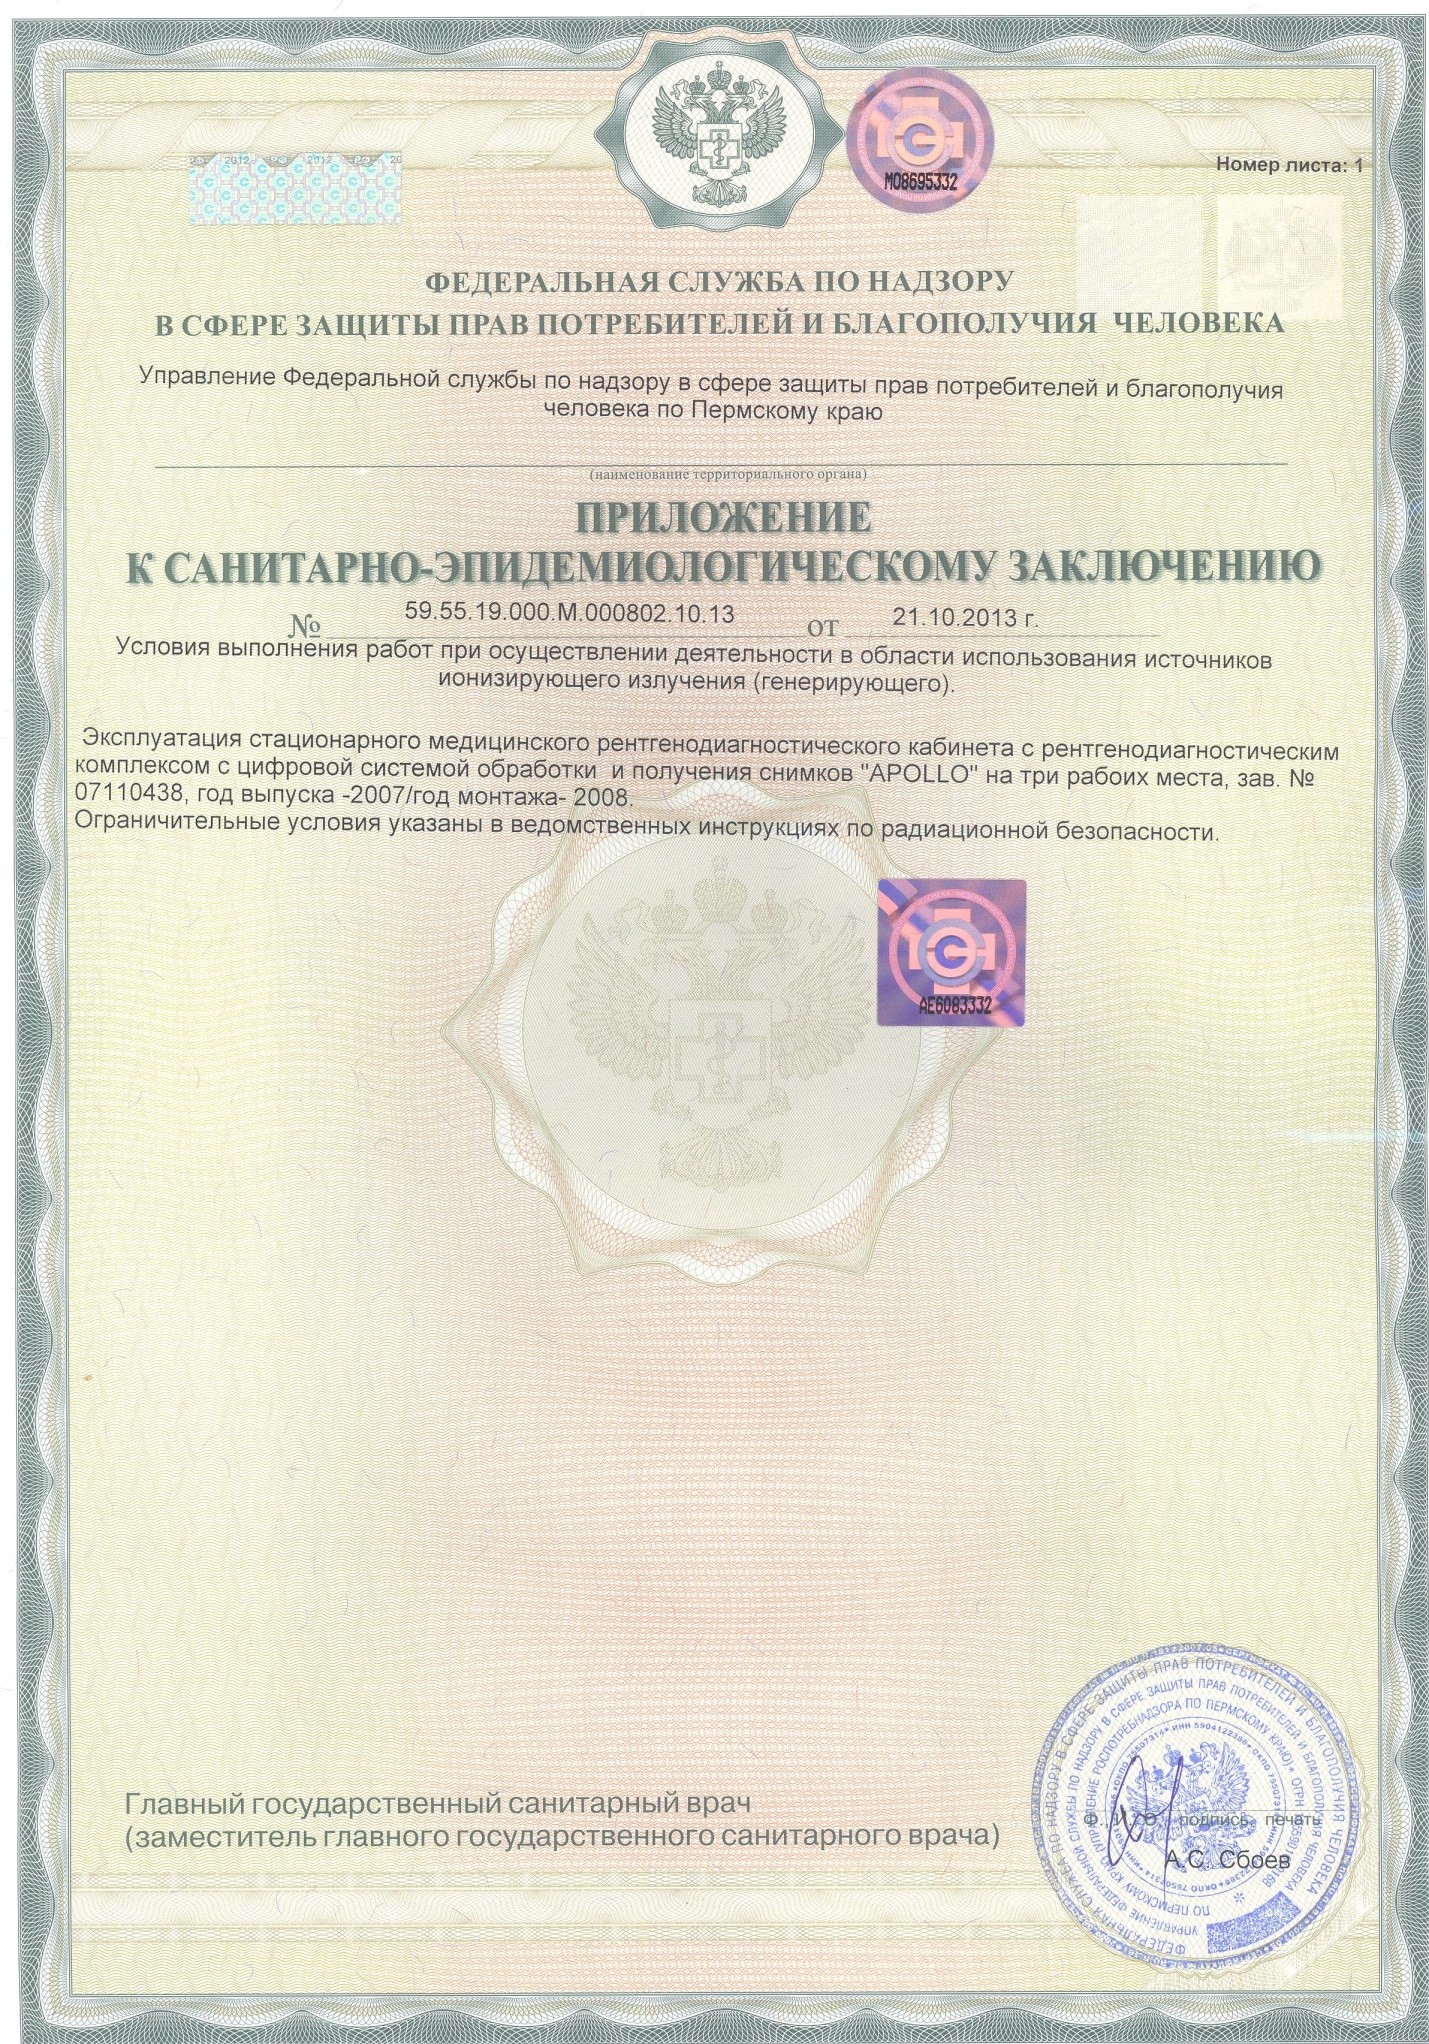 Sanitary-epidemiological certificate7